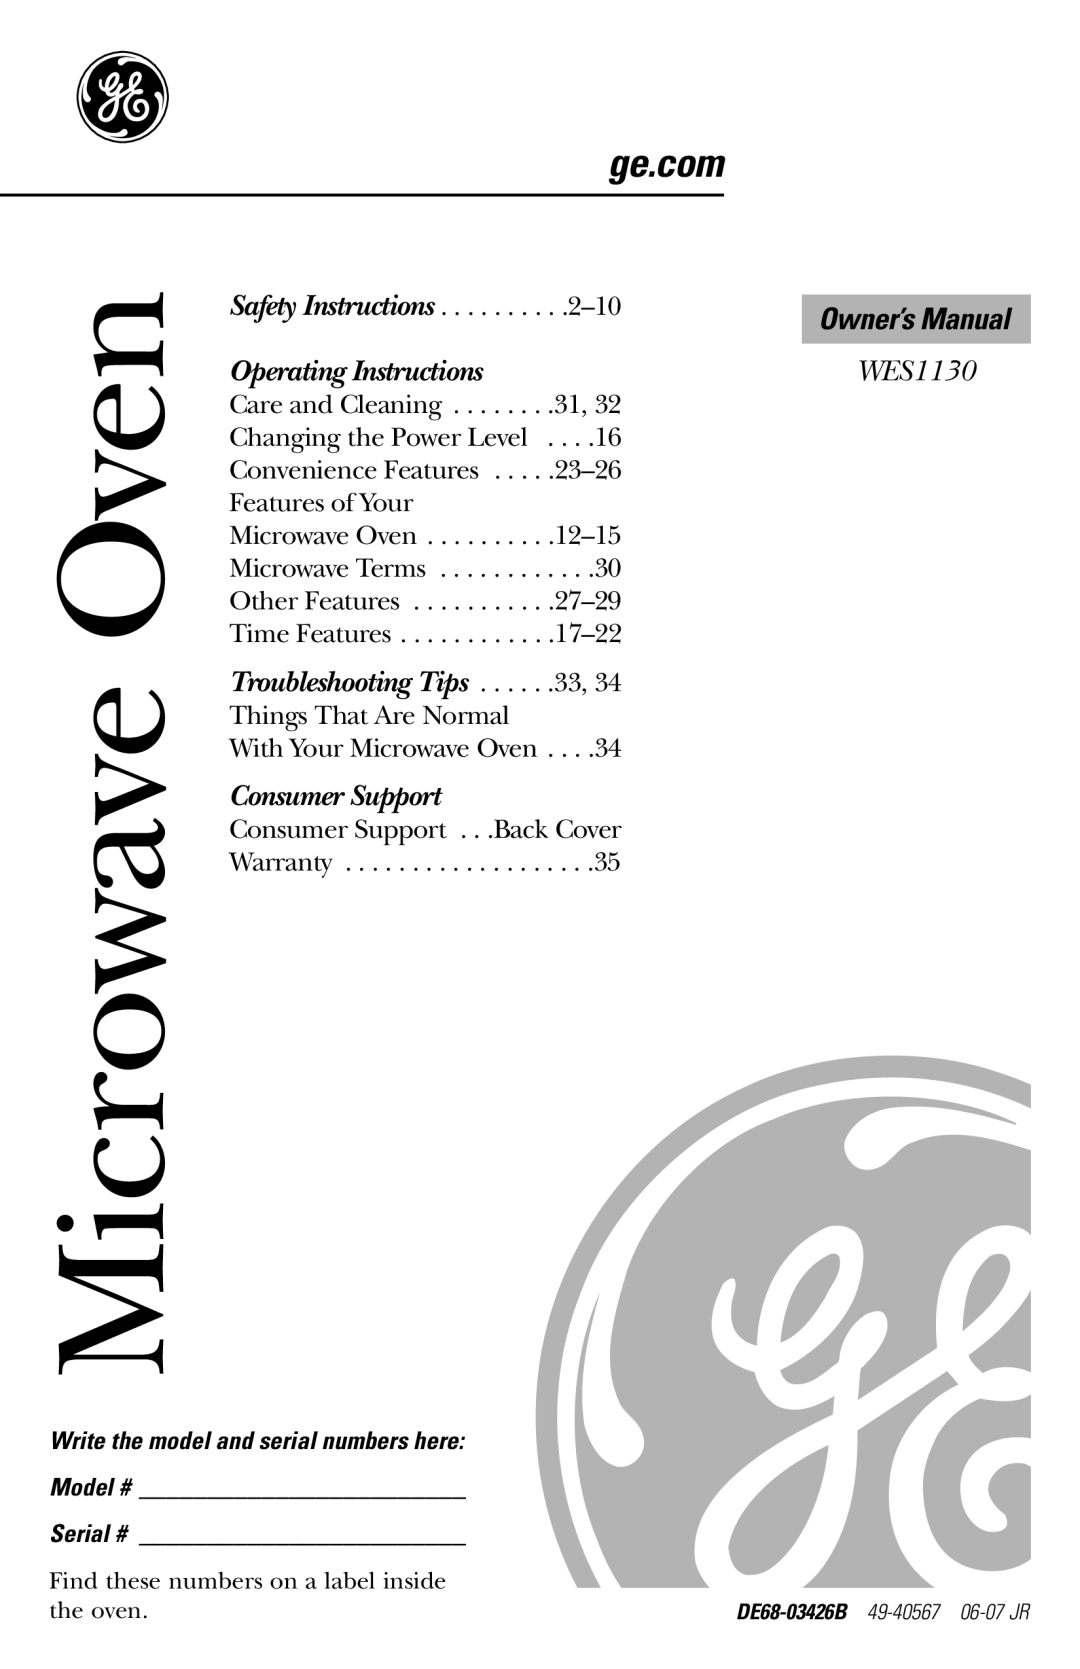 GE WES1130 owner manual ge.com, Model # Serial #, Microwave Oven, Operating Instructions, Troubleshooting Tips 